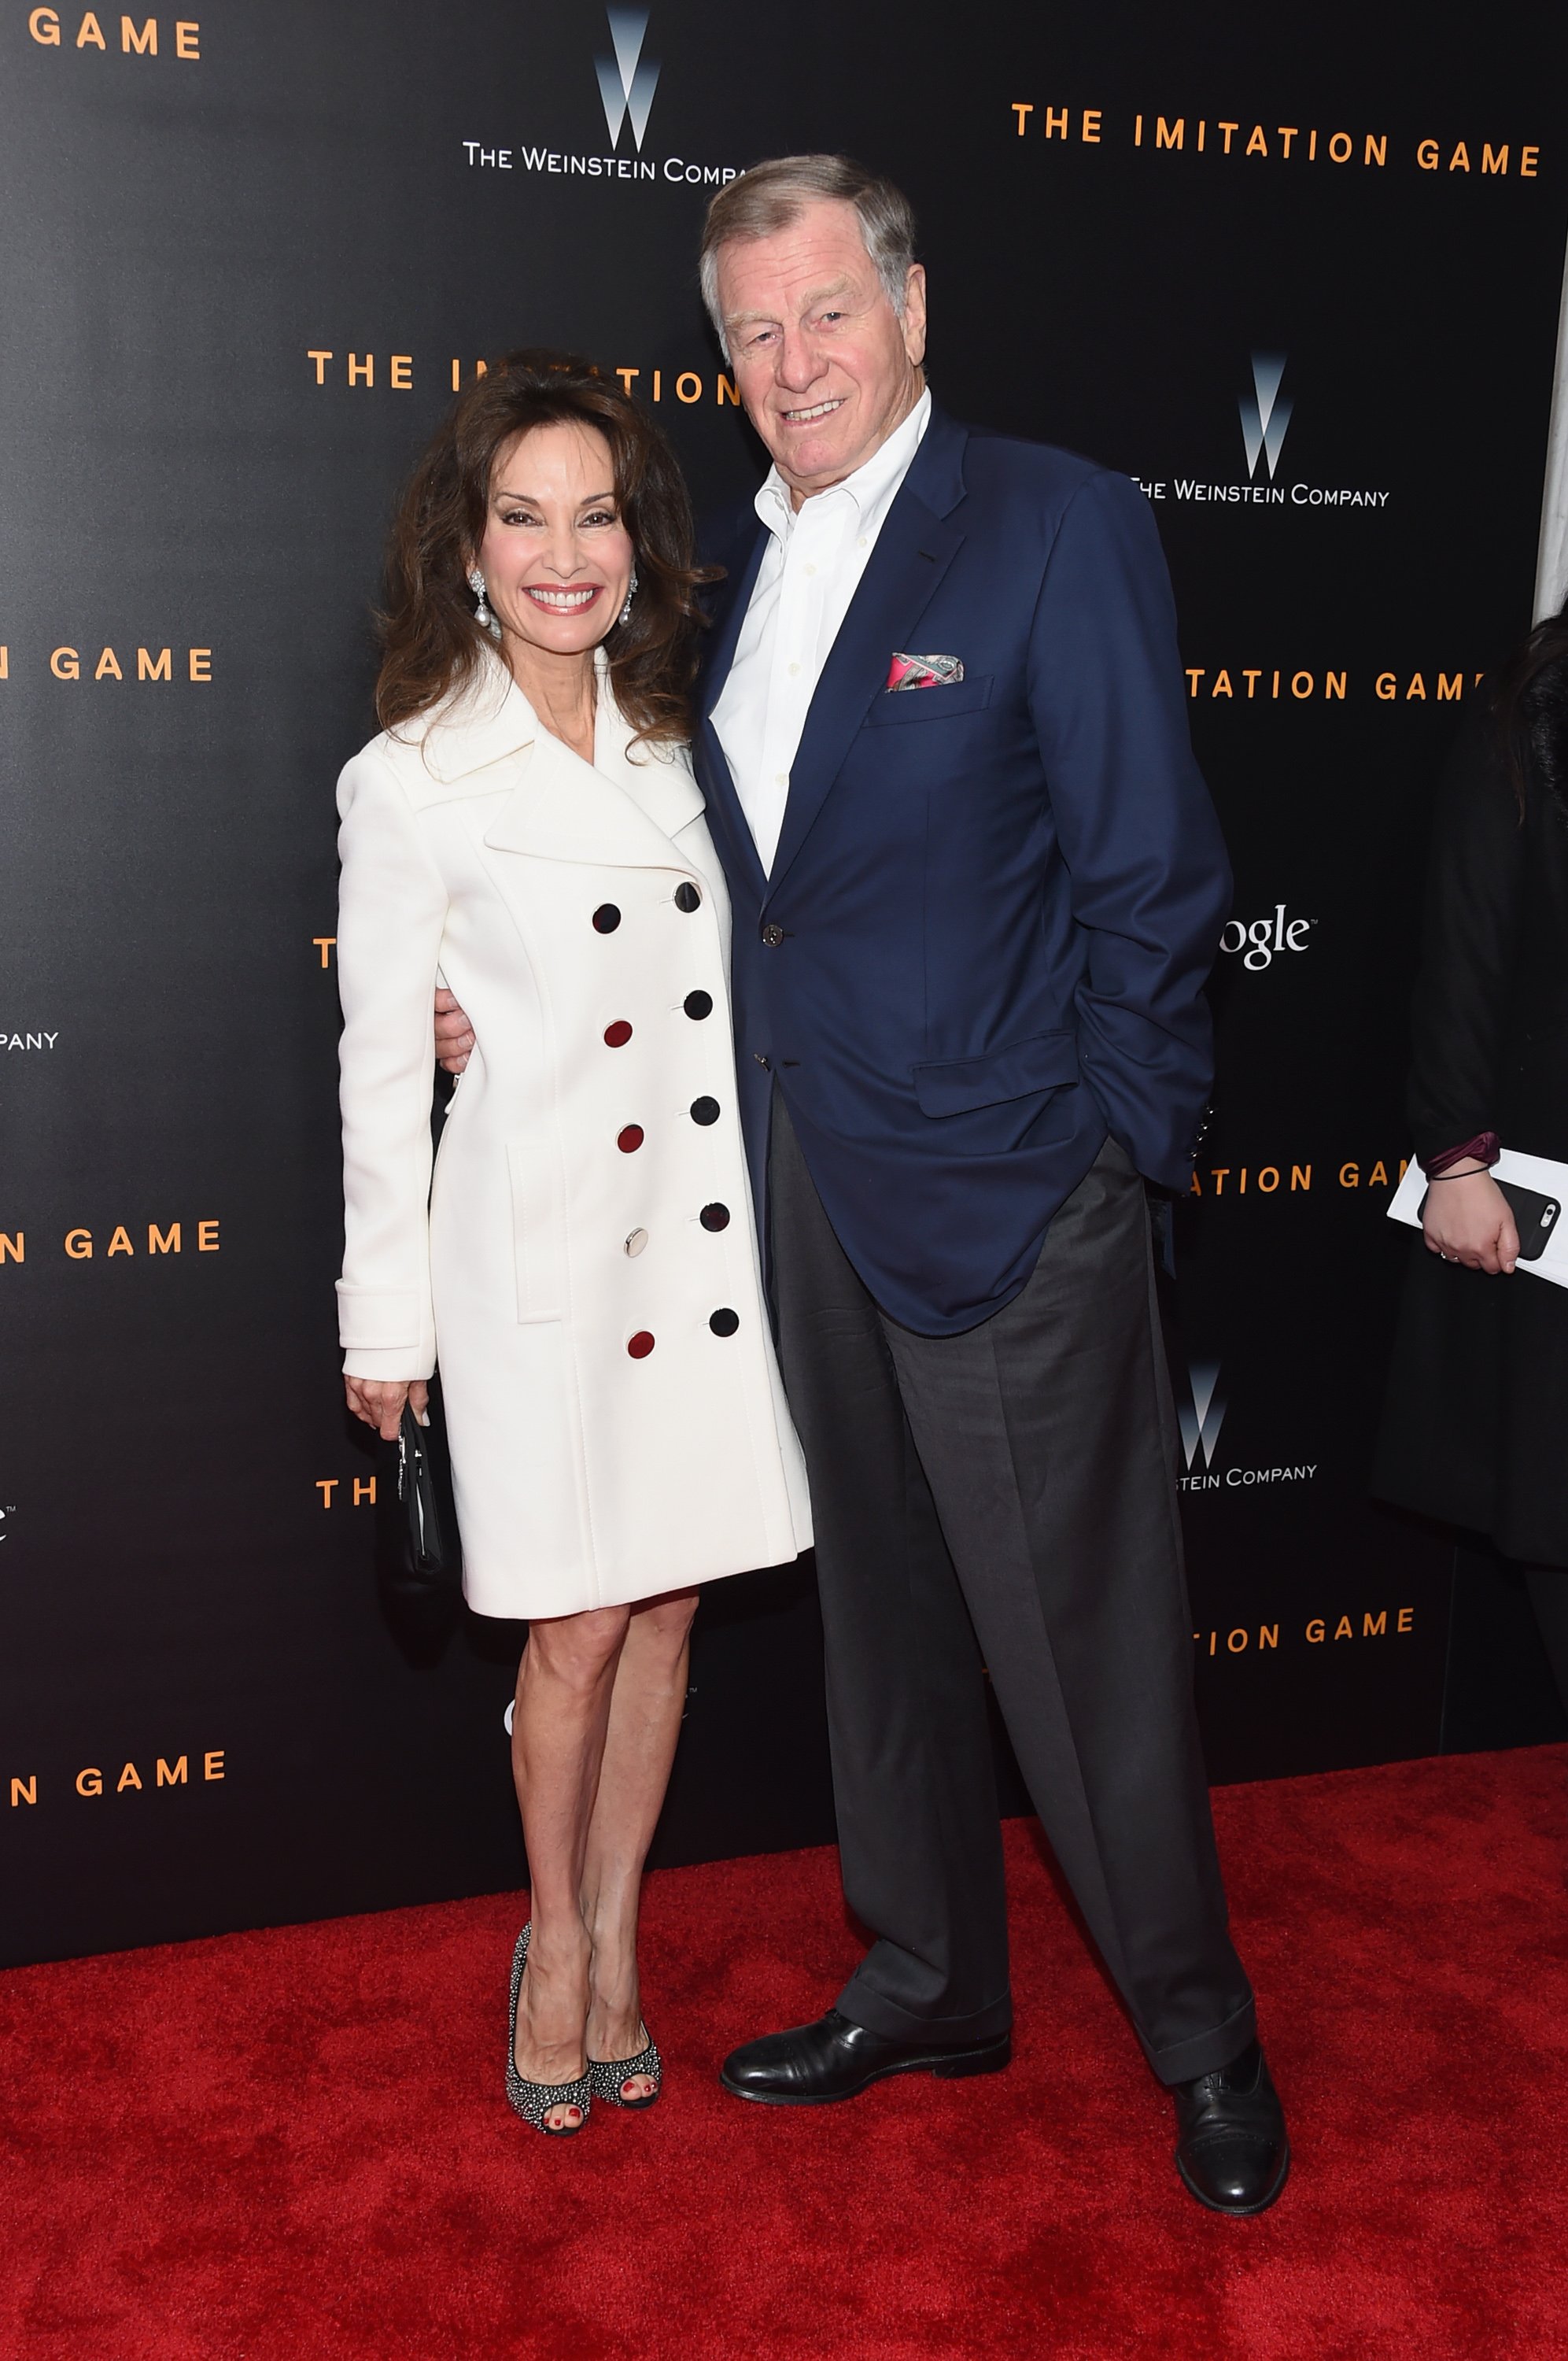 Susan Lucci and her husband, chef Helmut Huber during the "The Imitation Game" New York premiere at Ziegfeld Theater on November 17, 2014 in New York City. | Source: Getty Images